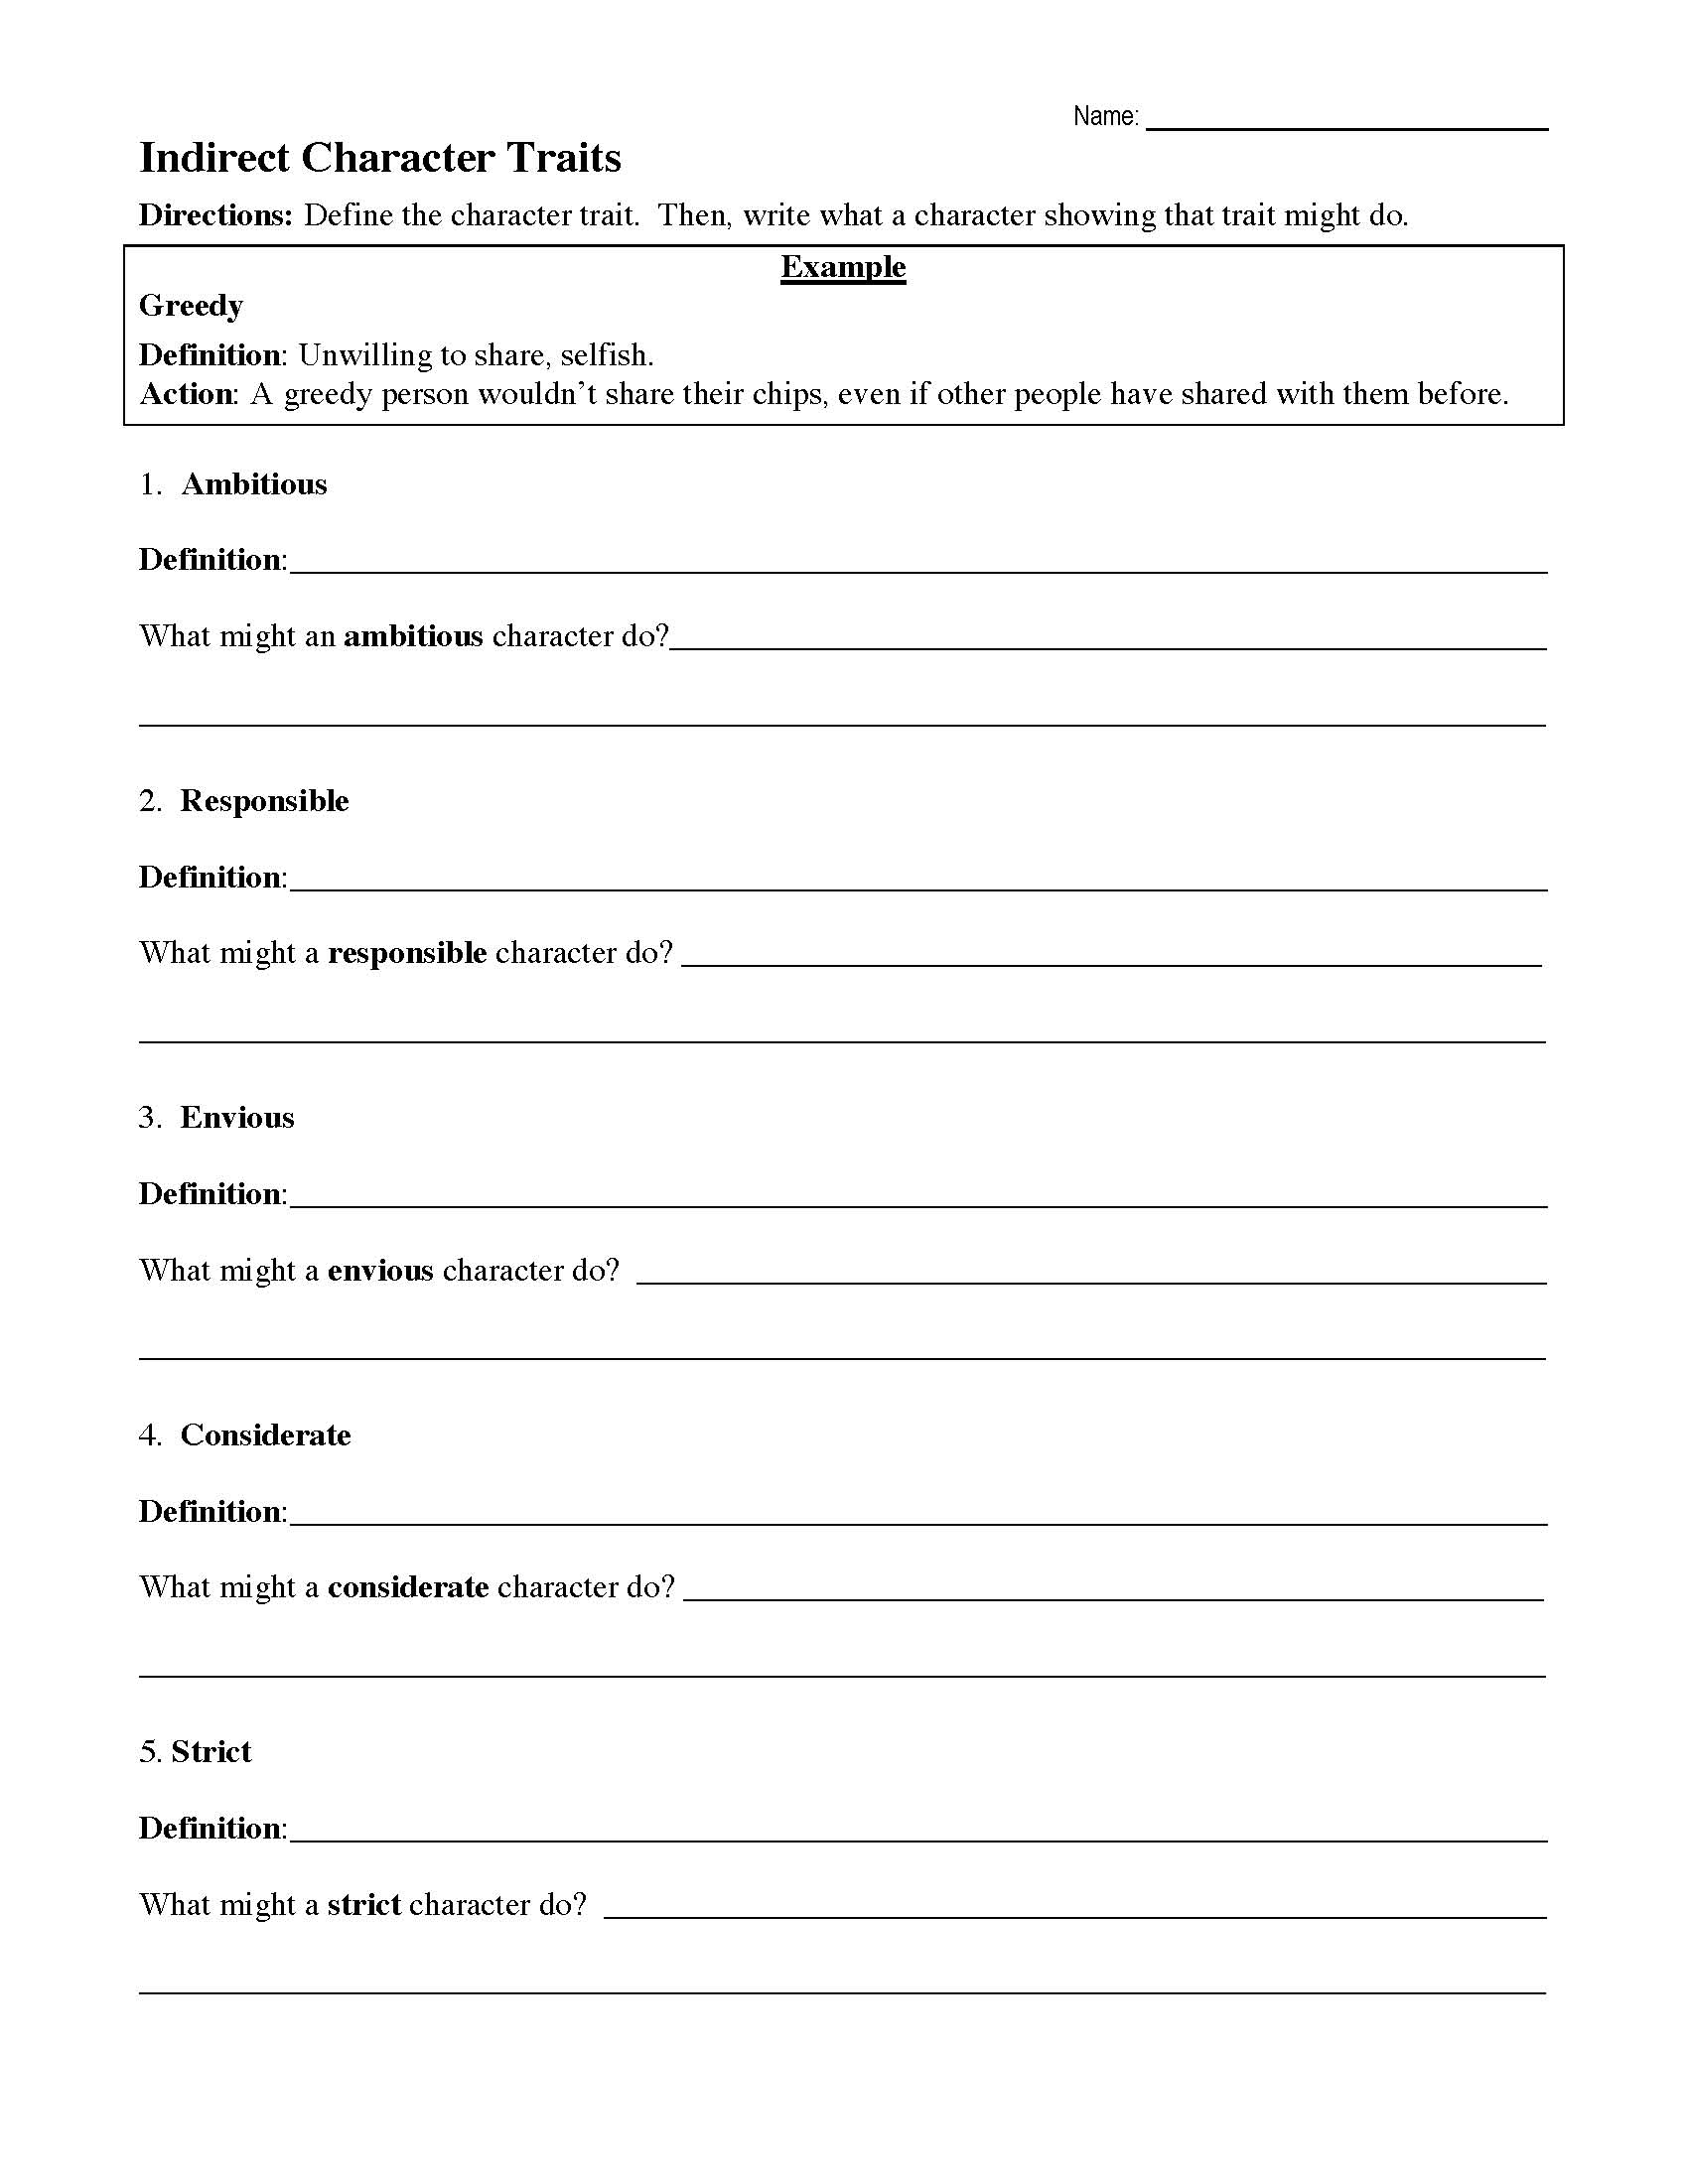 Characterization Worksheets  Ereading Worksheets For Identifying Character Traits Worksheet